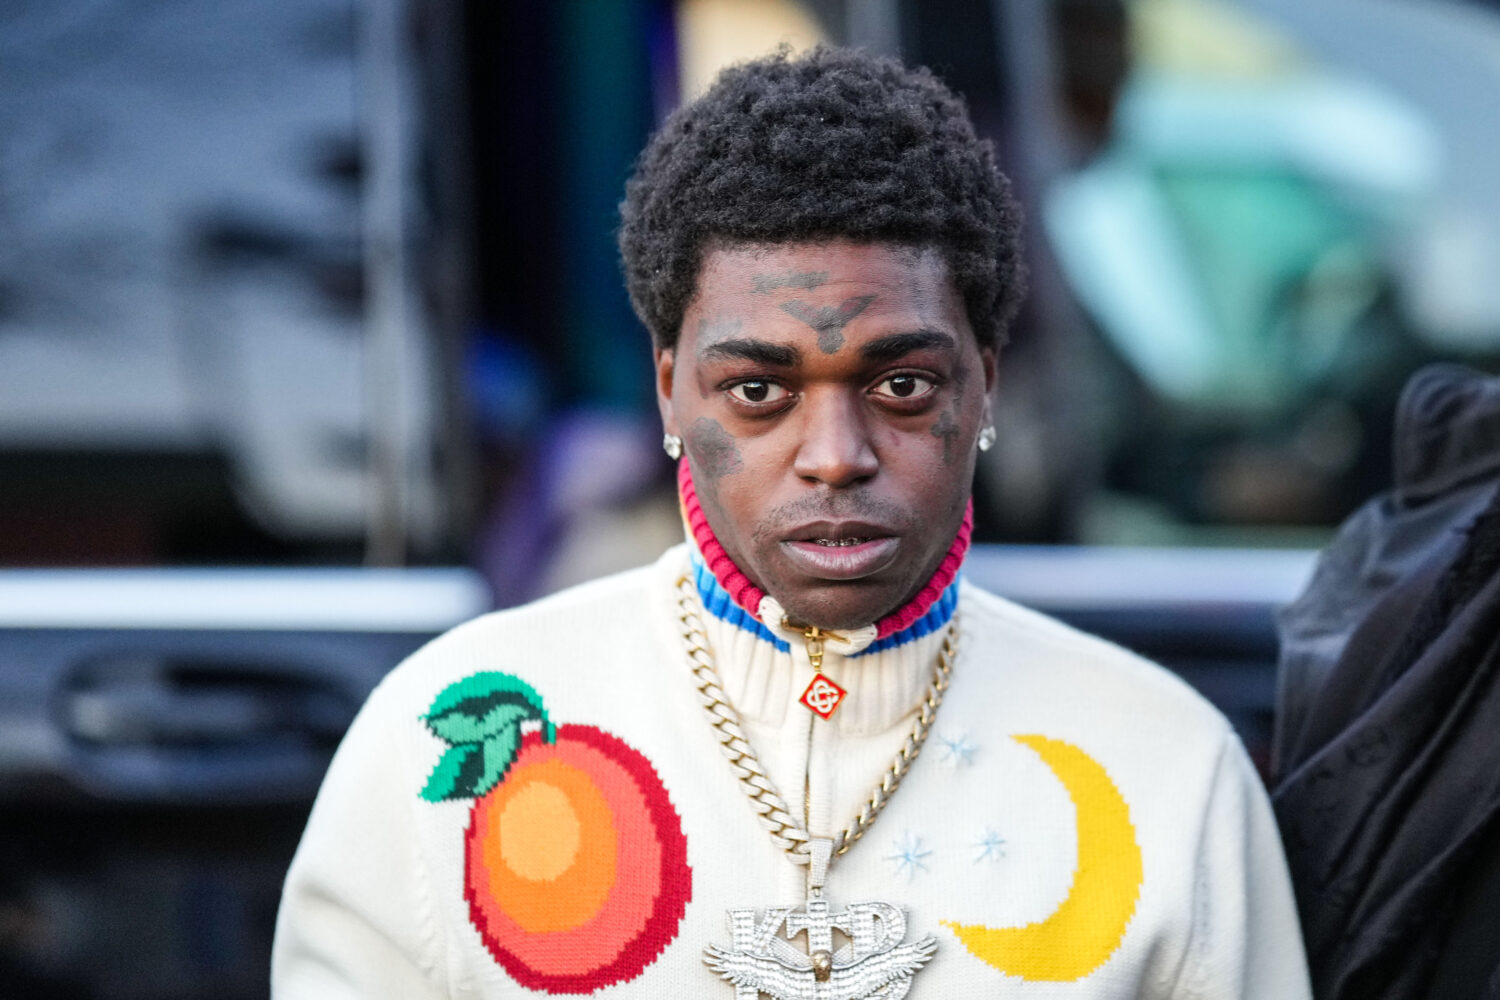 Kodak Black Outfit from October 7, 2021, WHAT'S ON THE STAR?